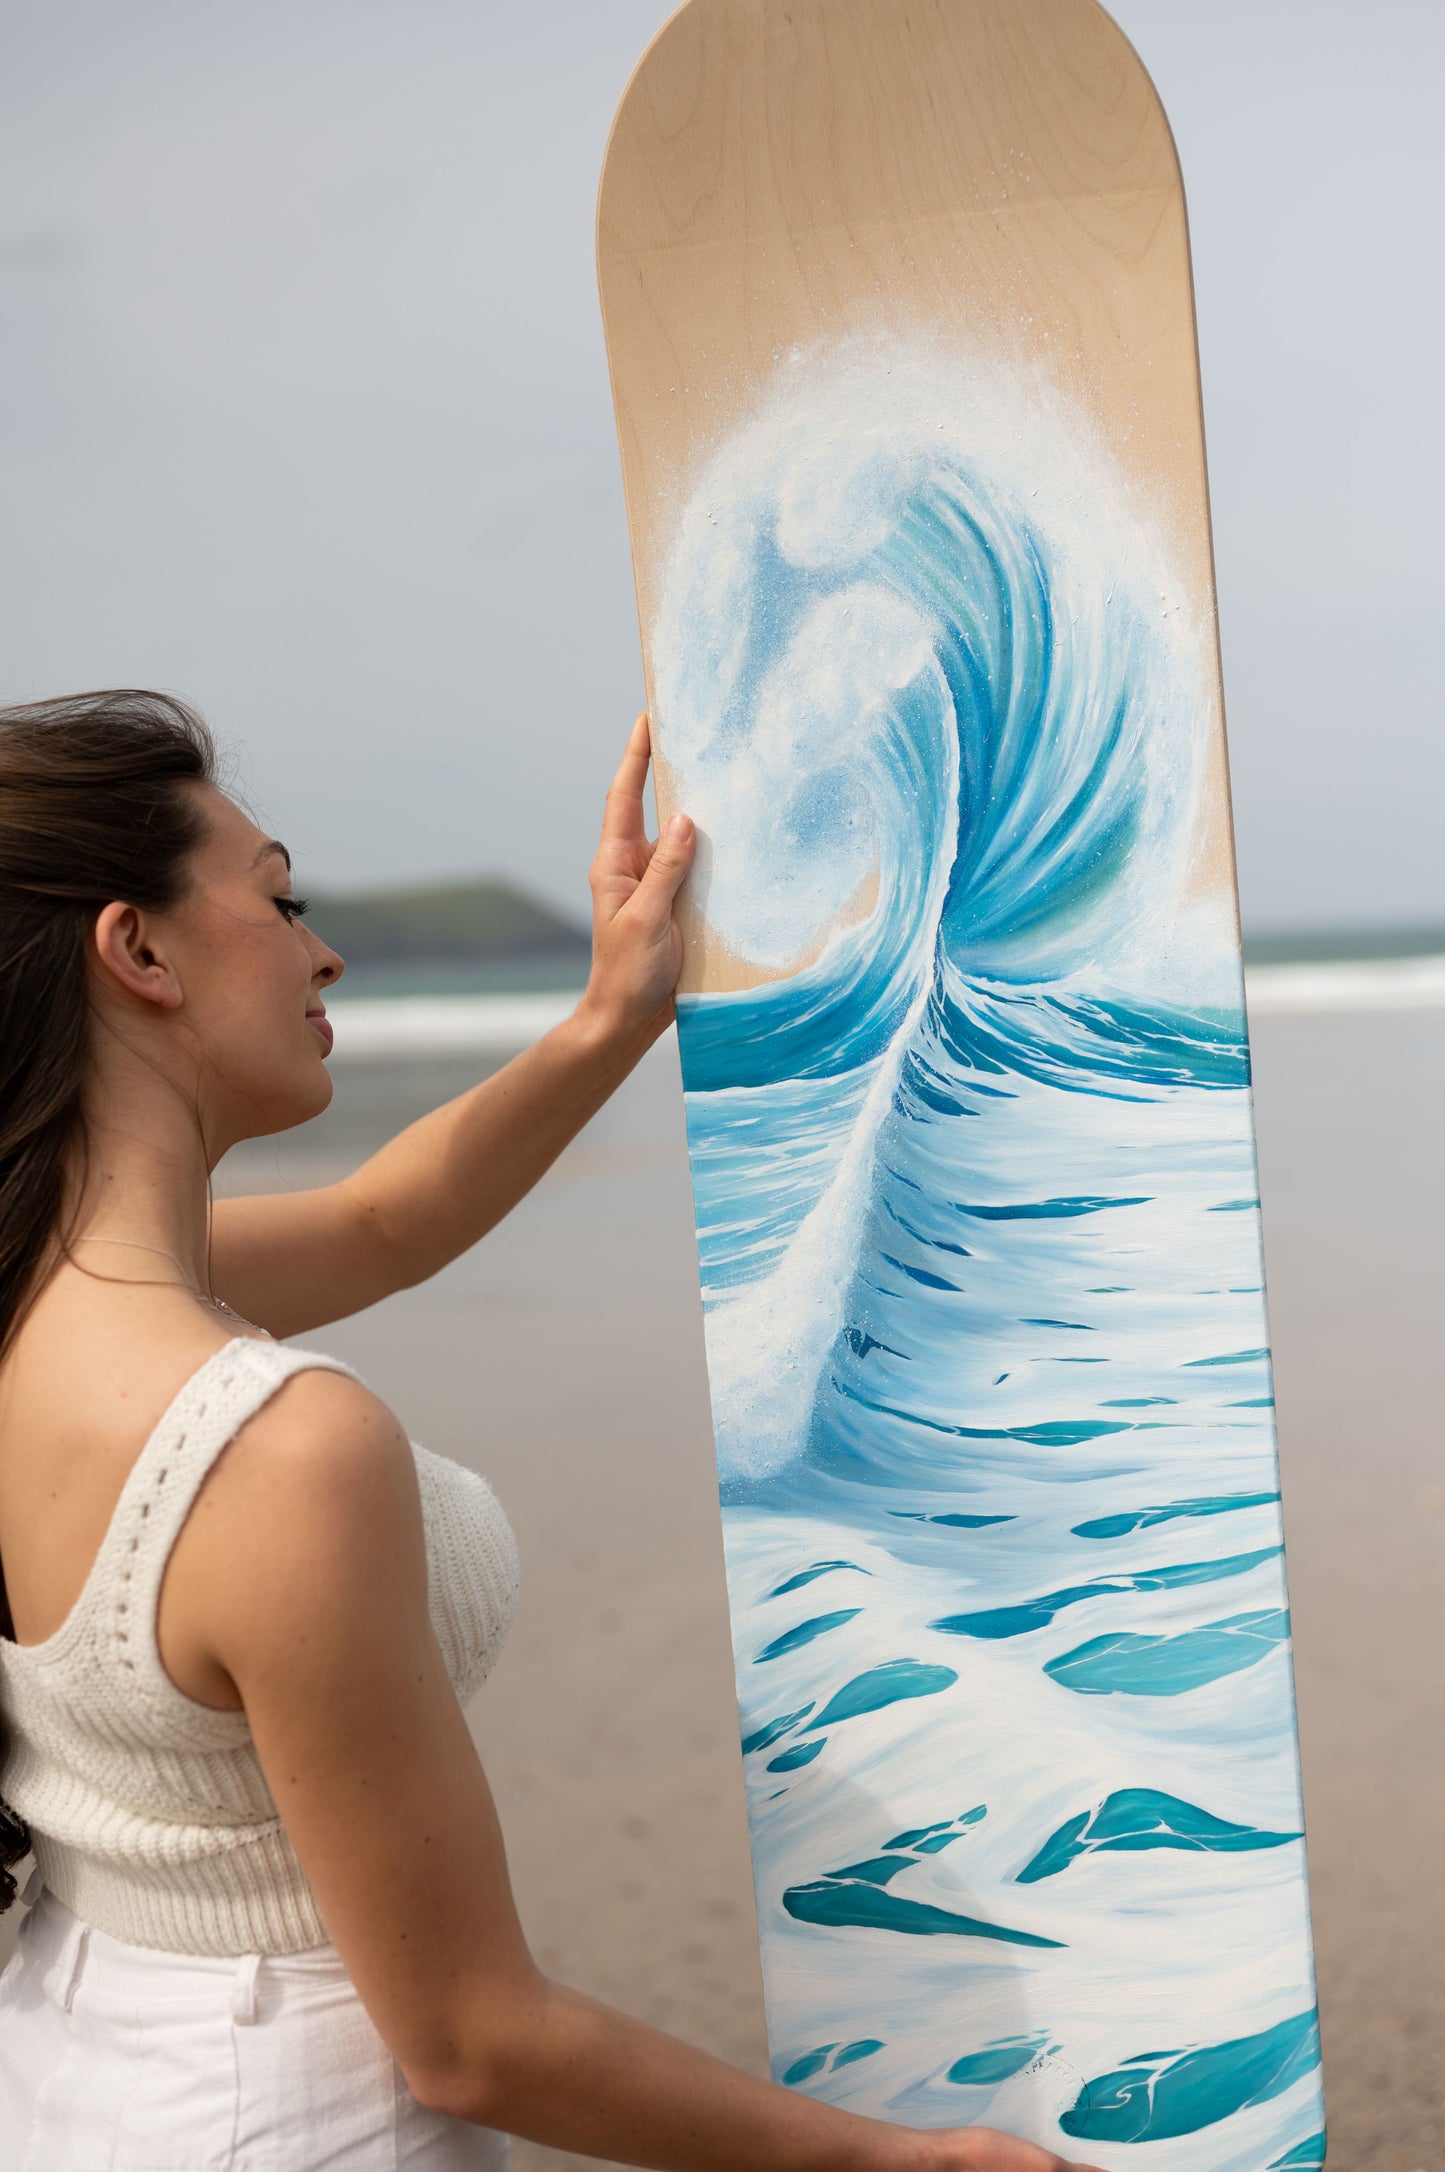 wave painting on wooden bellyboard by cornish artist, Phoebe Pocock.